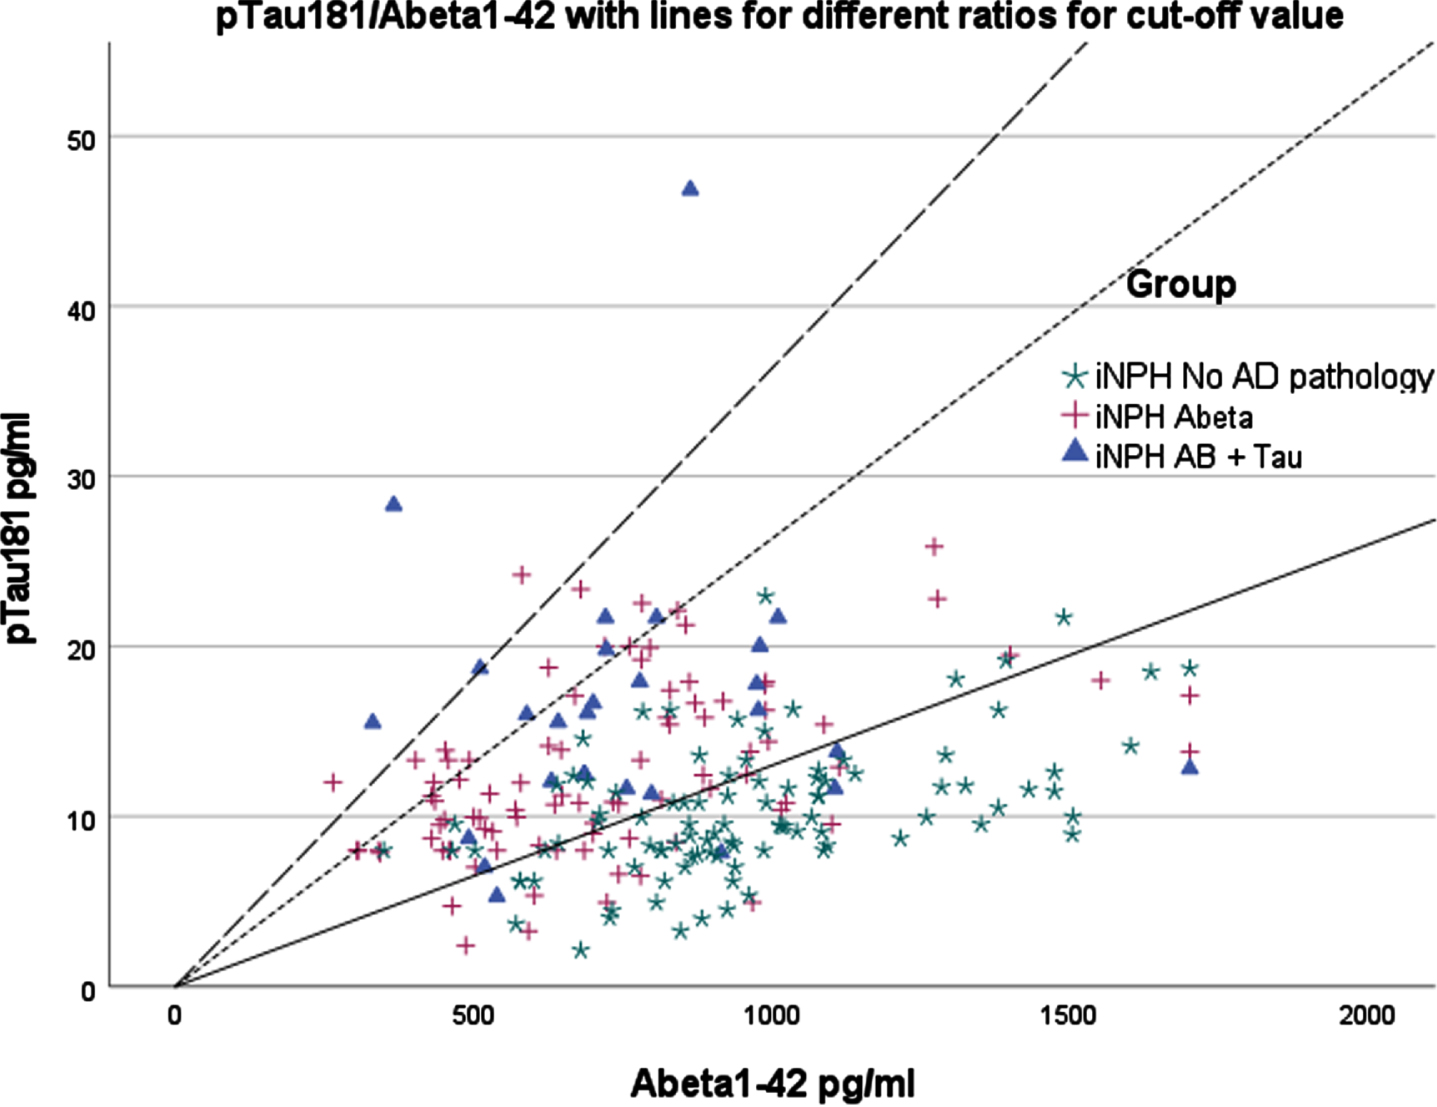 P-Tau181/Aβ1 - 42 ratio. Different lines indicate different potential cutoffs for the ratio. pTau181, phosphorylated tau from lumbar sample; Abeta1-42, Aβ1 - 42 from lumbar sample. Continuous line indicates ratio obtained from linear regression analysis (0.013). Line with large dashes indicates ratio as defined by cutoffs used for general population (0.0364). Line with short dashes indicates ratio with cutoffs using correction factor (0.0263).